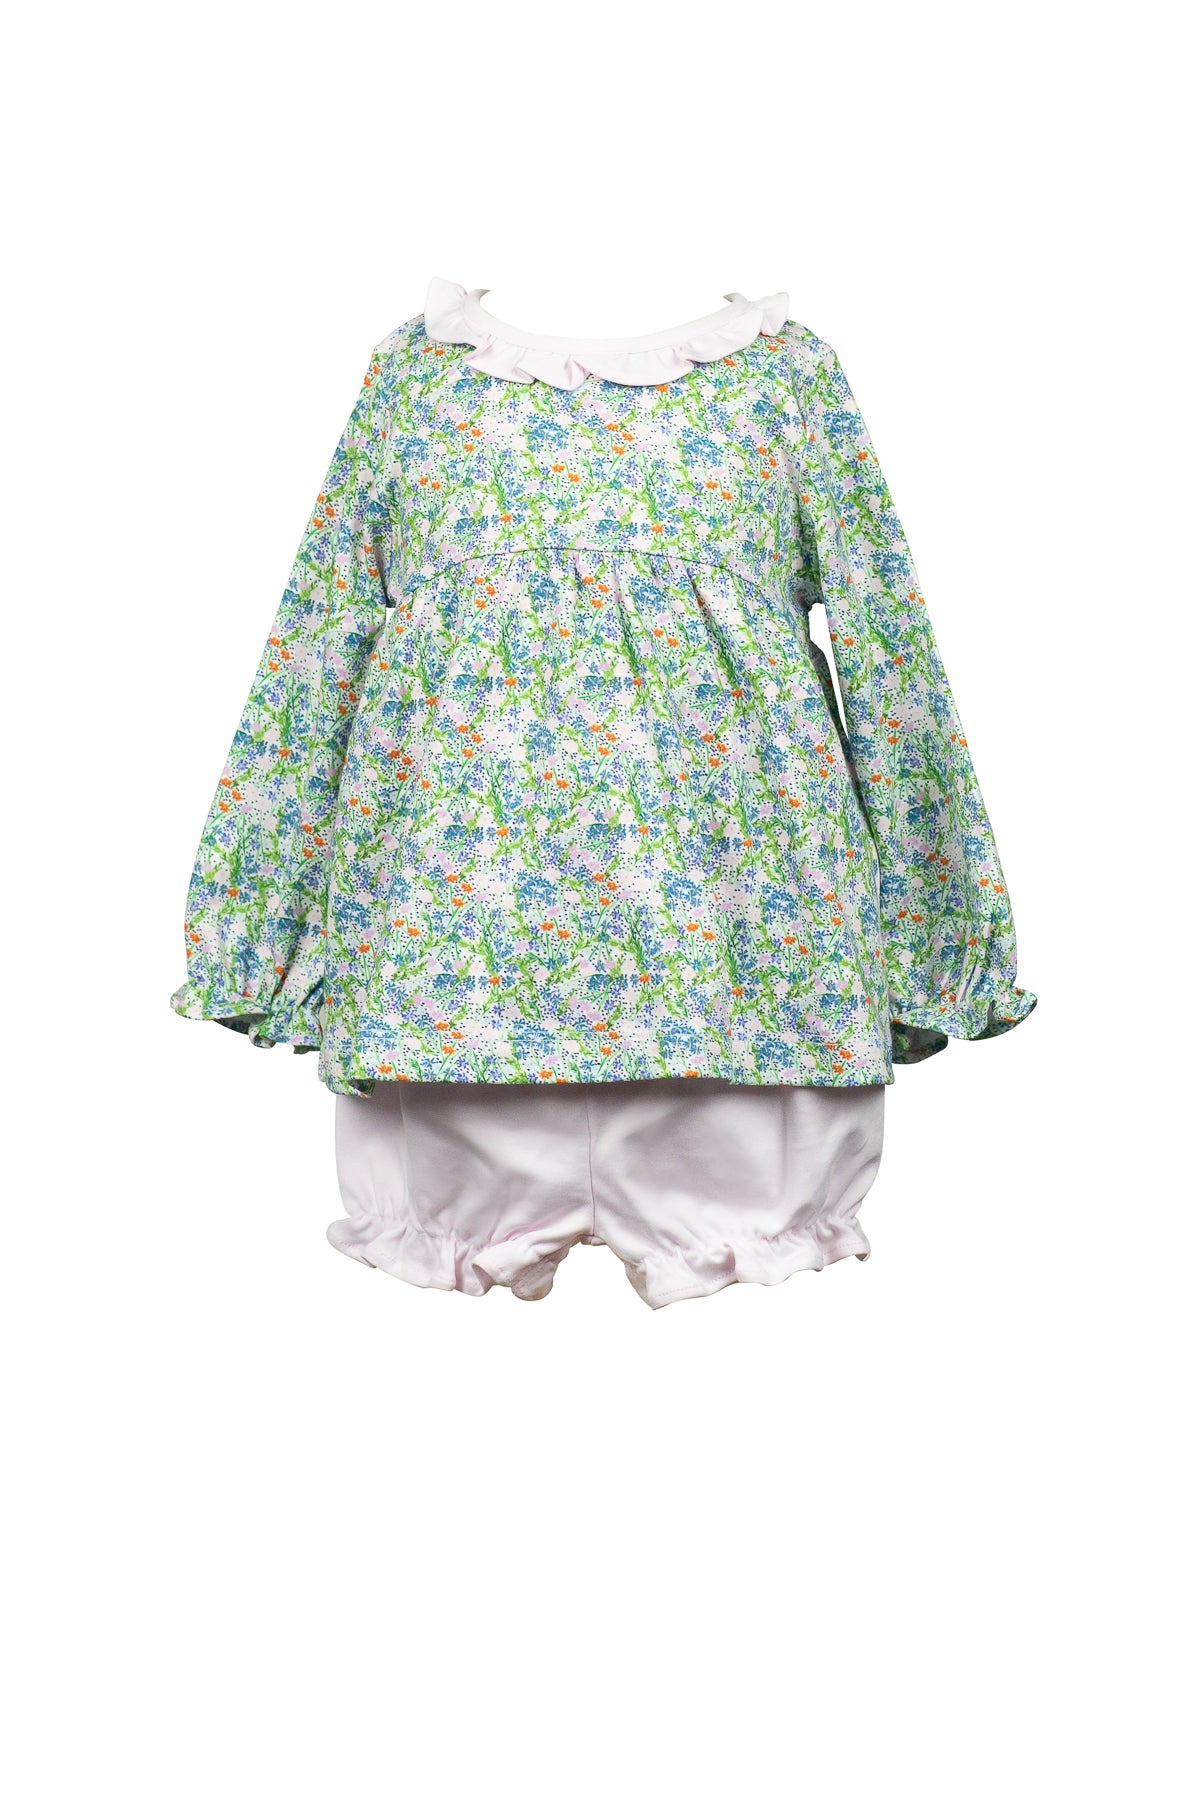 The Proper Peony Fall Floral Bloomer Set - Little Birdies